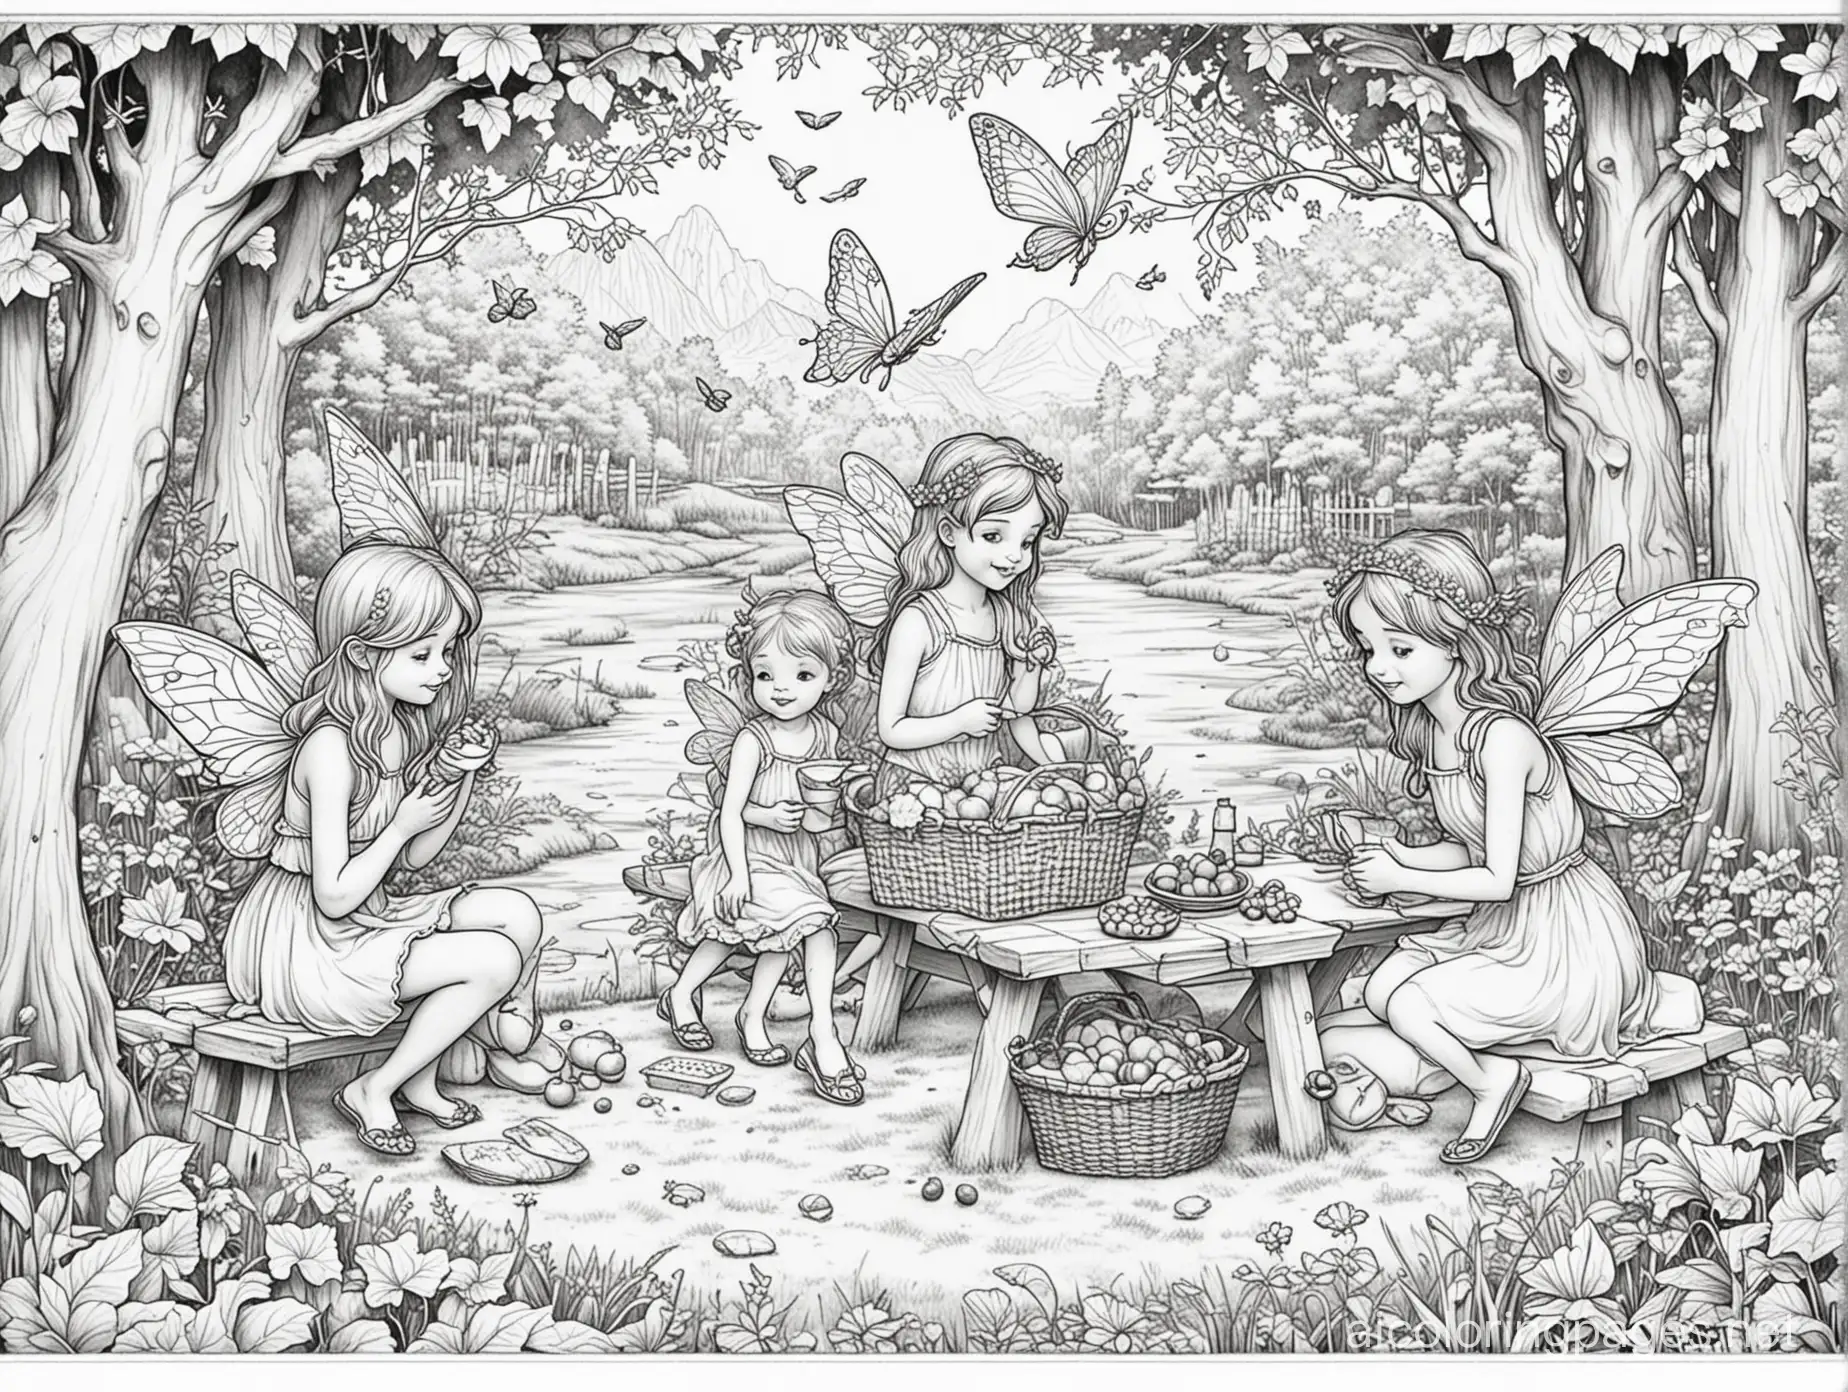 Fairies-Picnic-Coloring-Page-with-Ample-White-Space-for-Kids